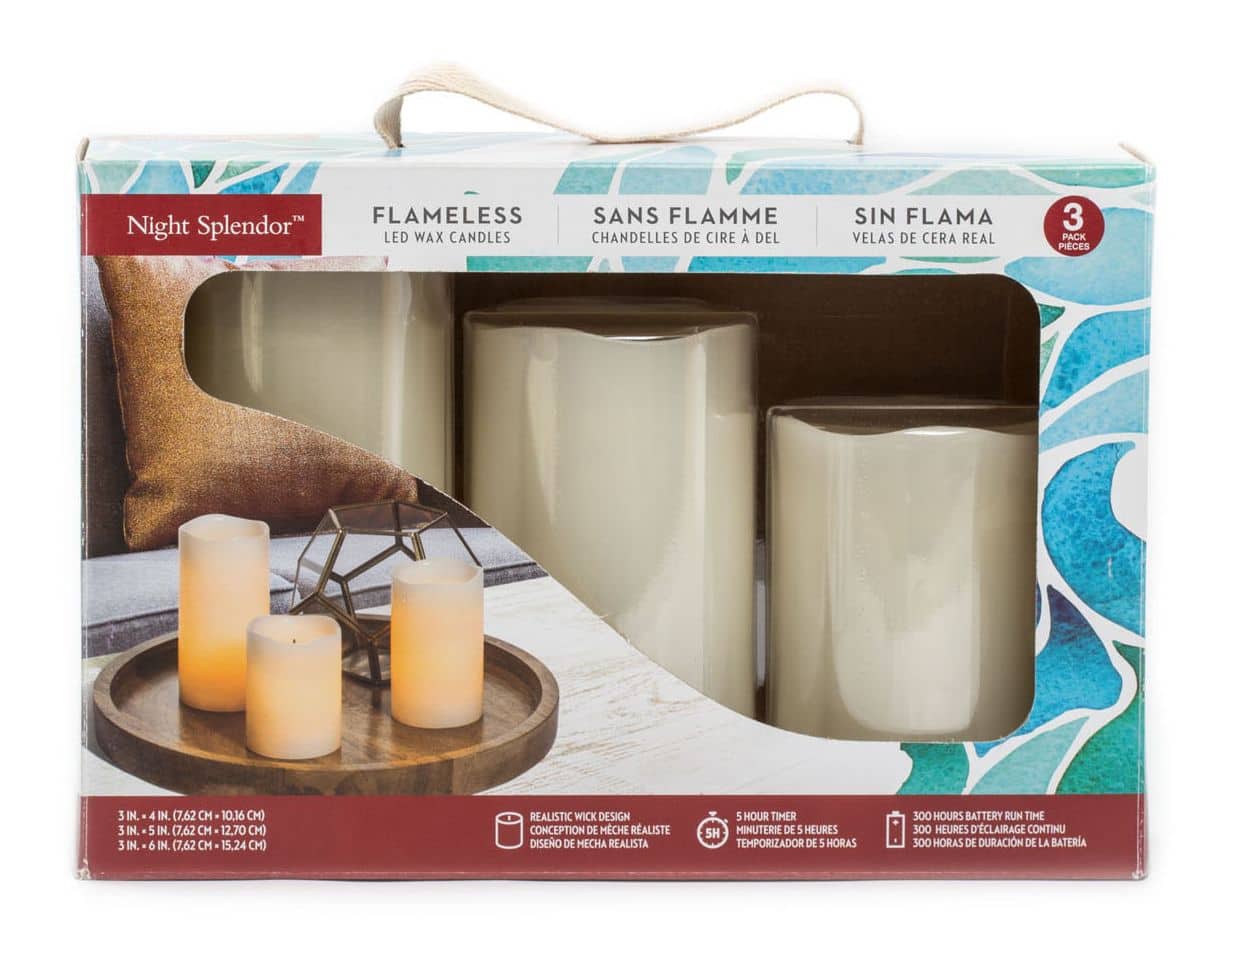 Luminessence Battery-Operated Ivory Wax LED Pillar Candles, 4.625x3.125 in.